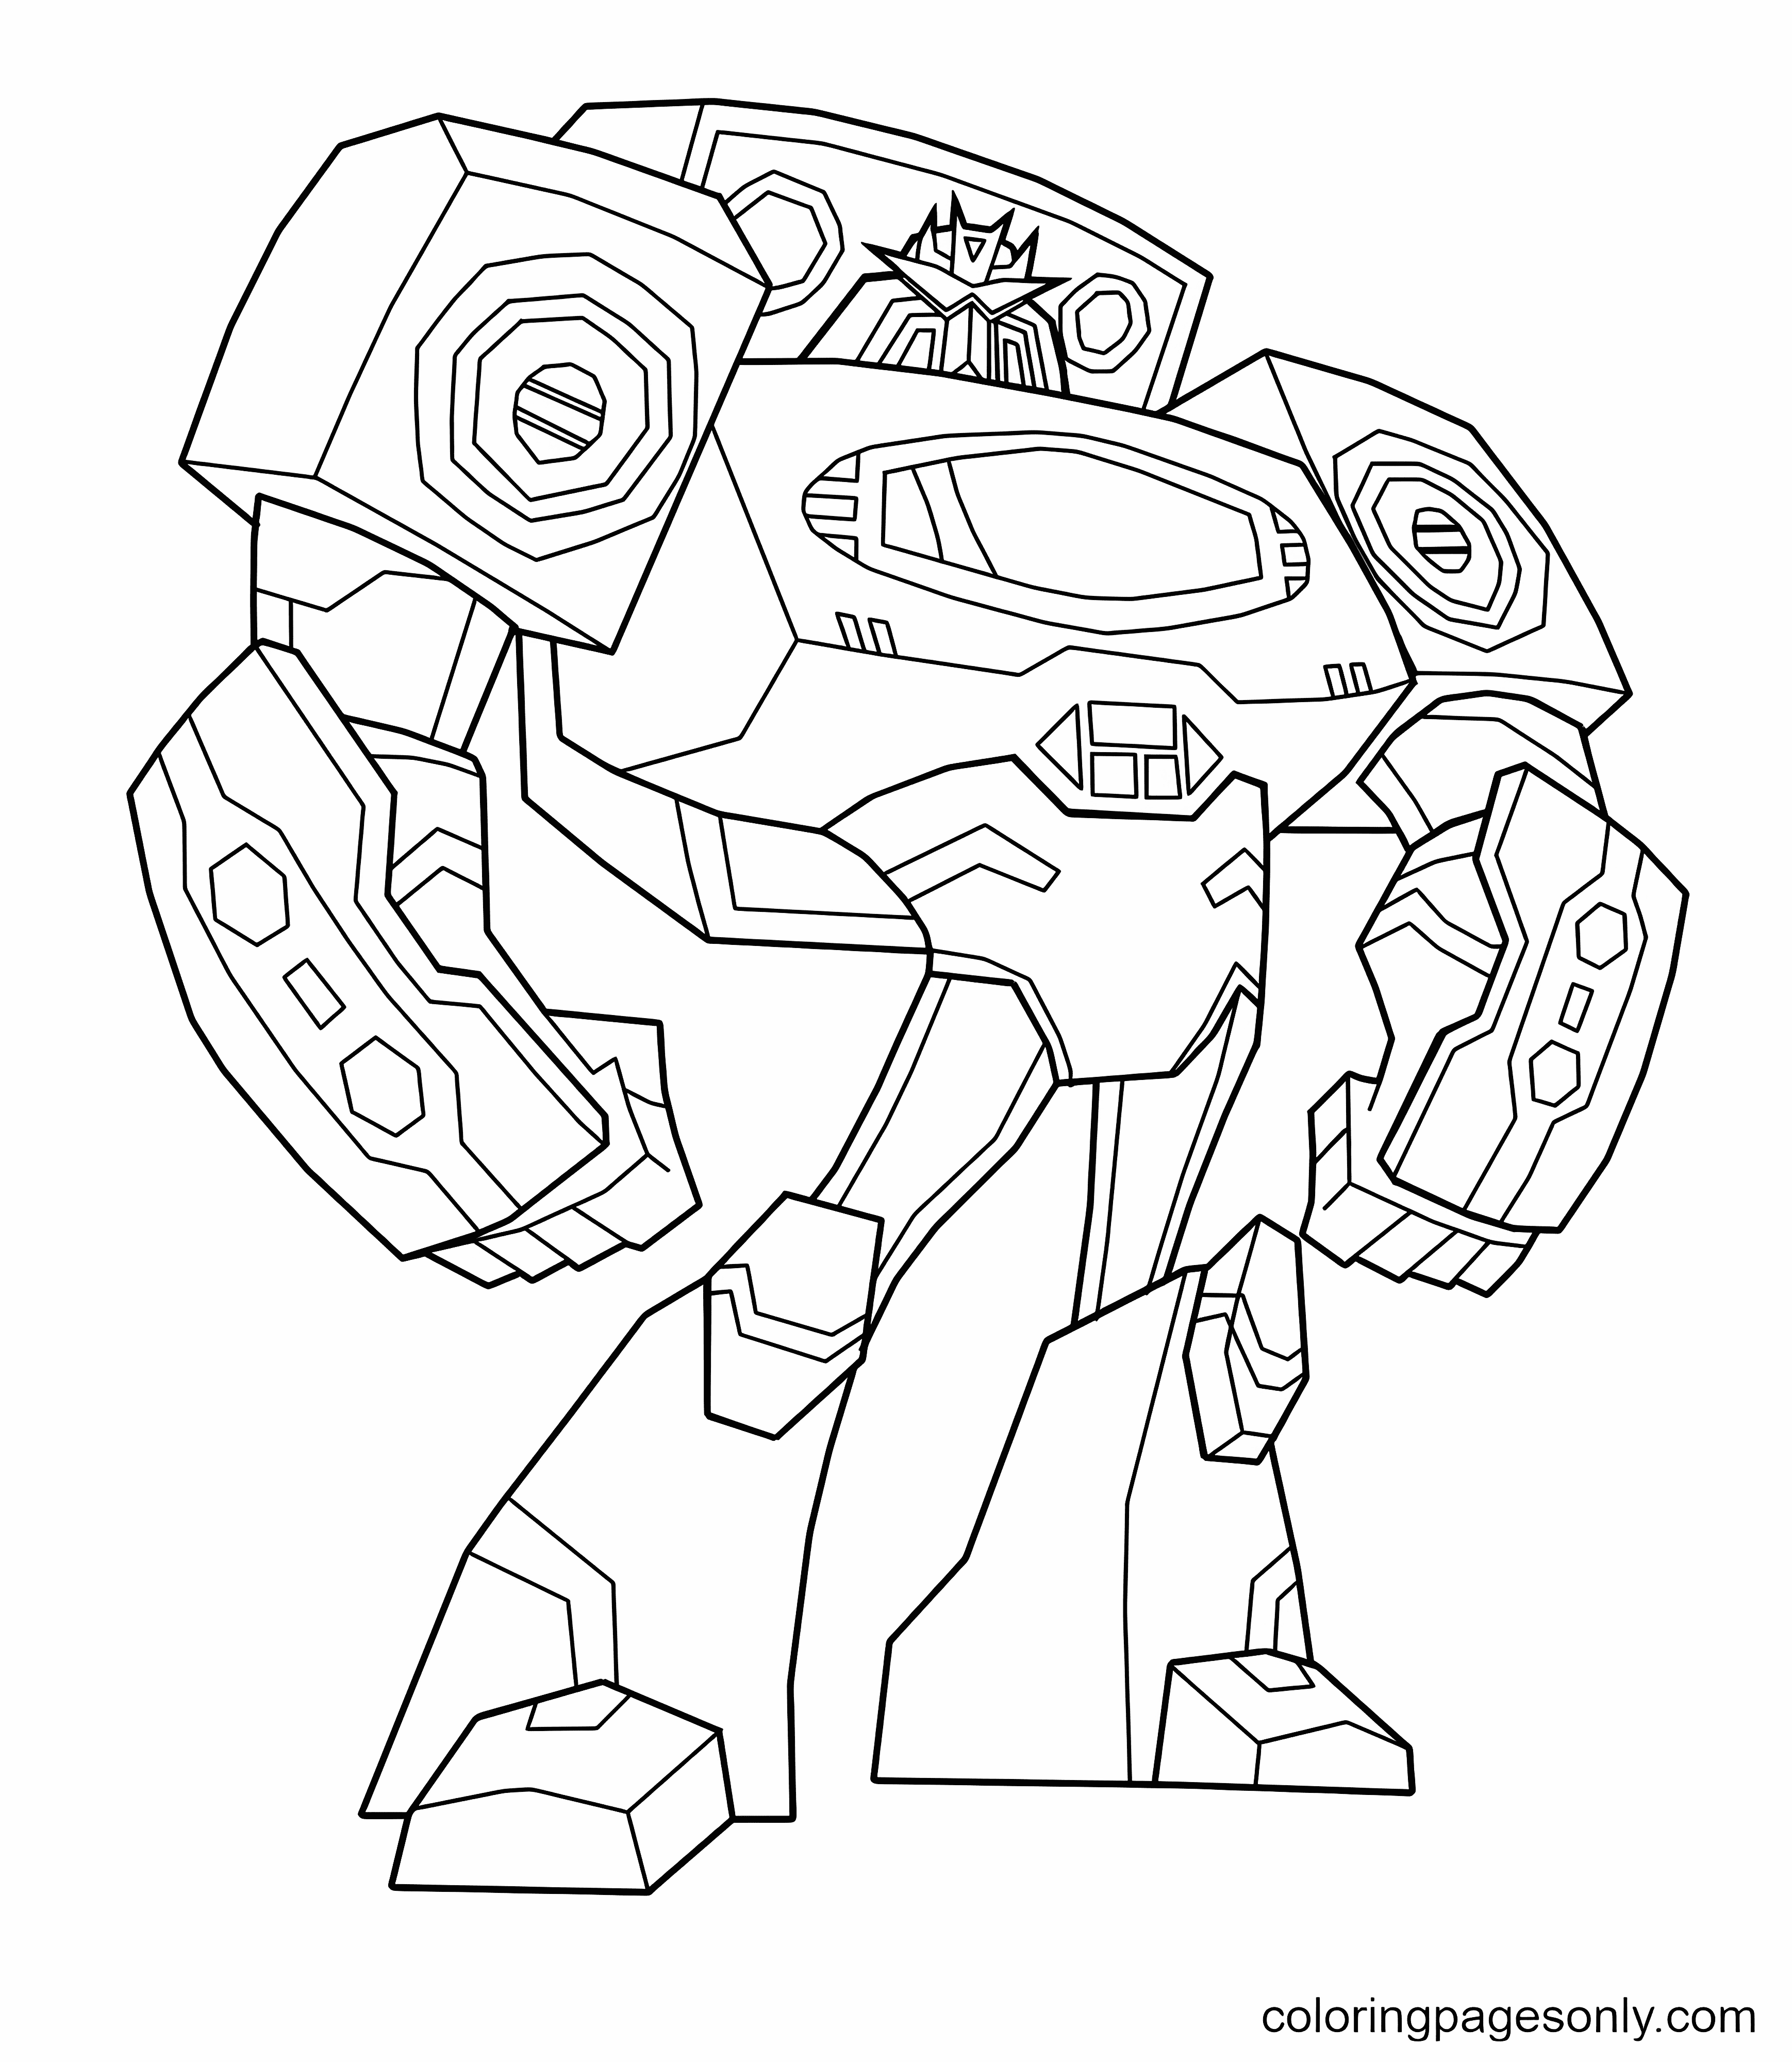 Transformers Strong Coloring Pages